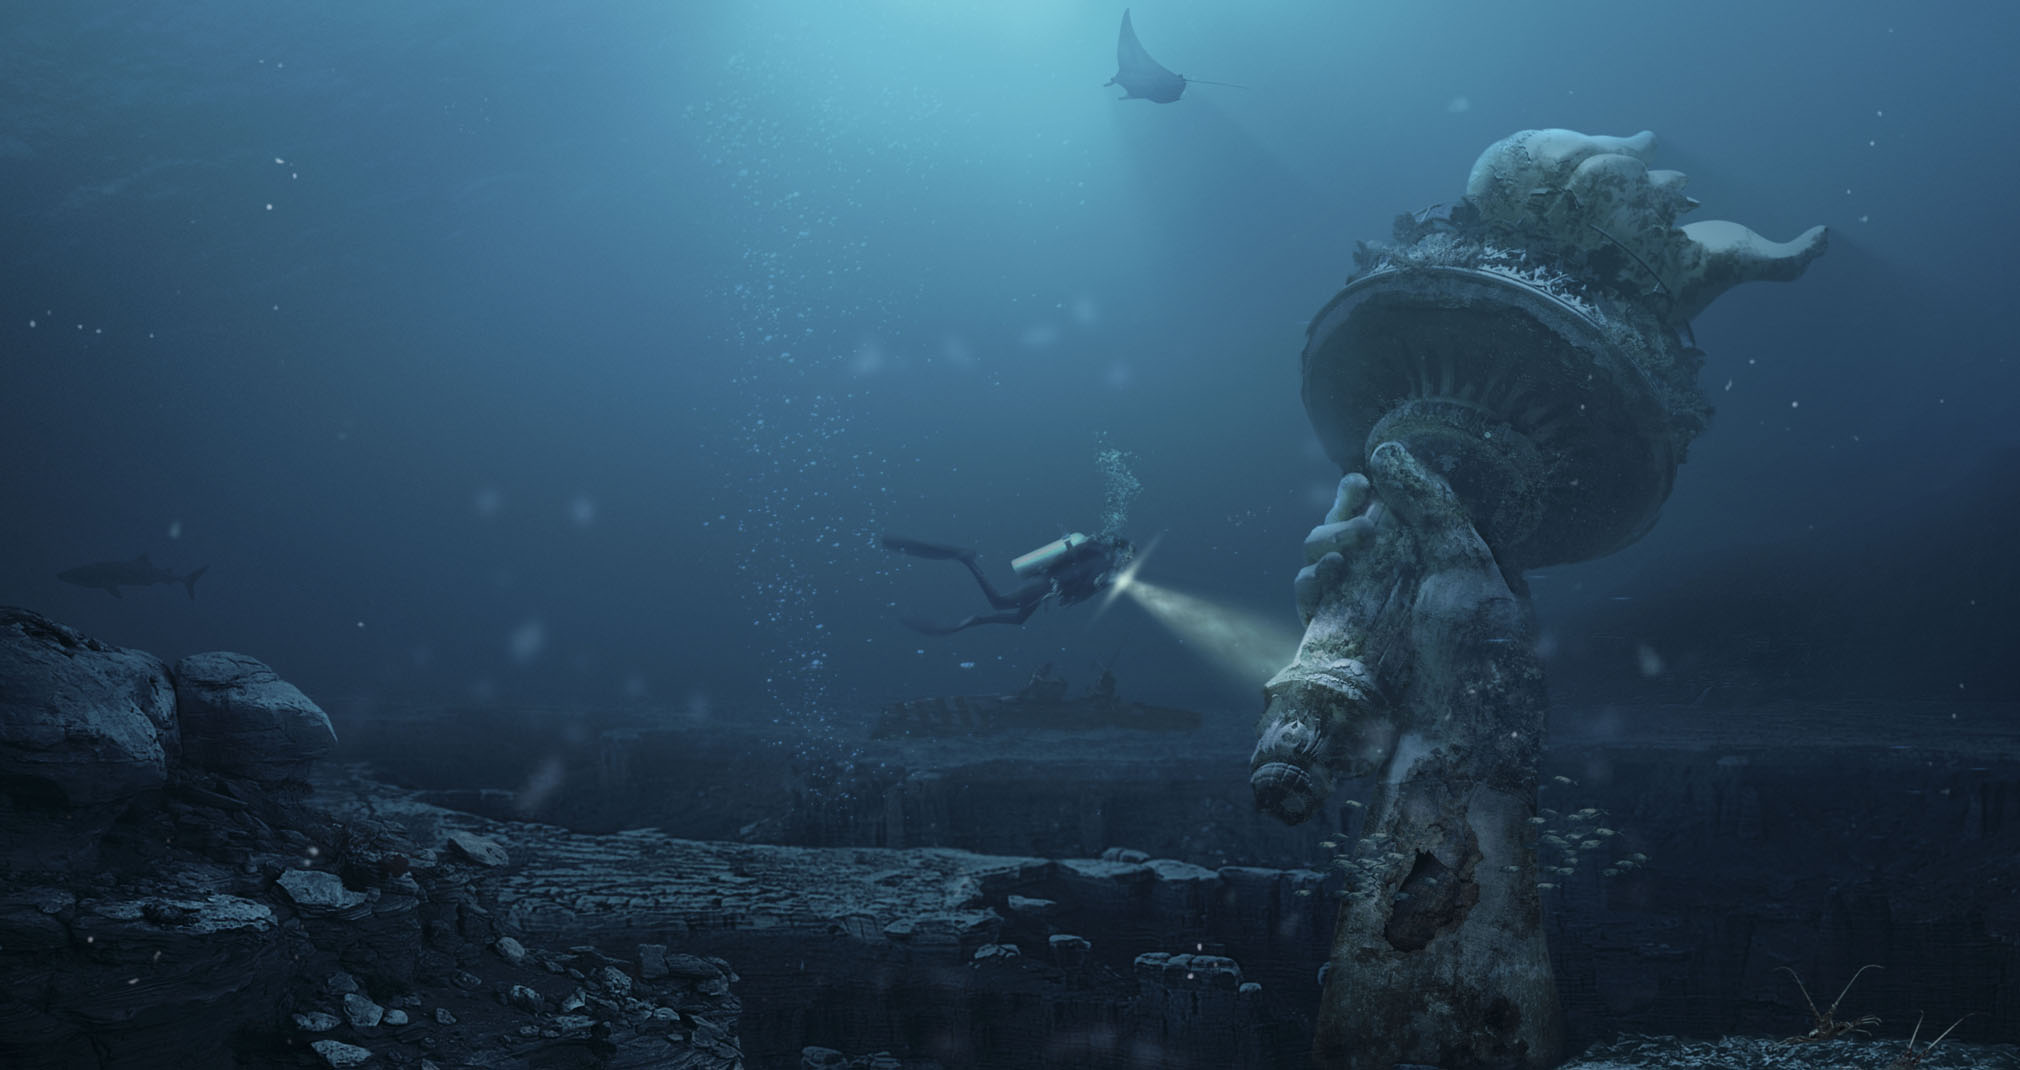 divers, Underwater, Water, Sea, Fish, Statue of Liberty, Rock, Apocalyptic, Photoshop, Bubbles, Lights Wallpaper